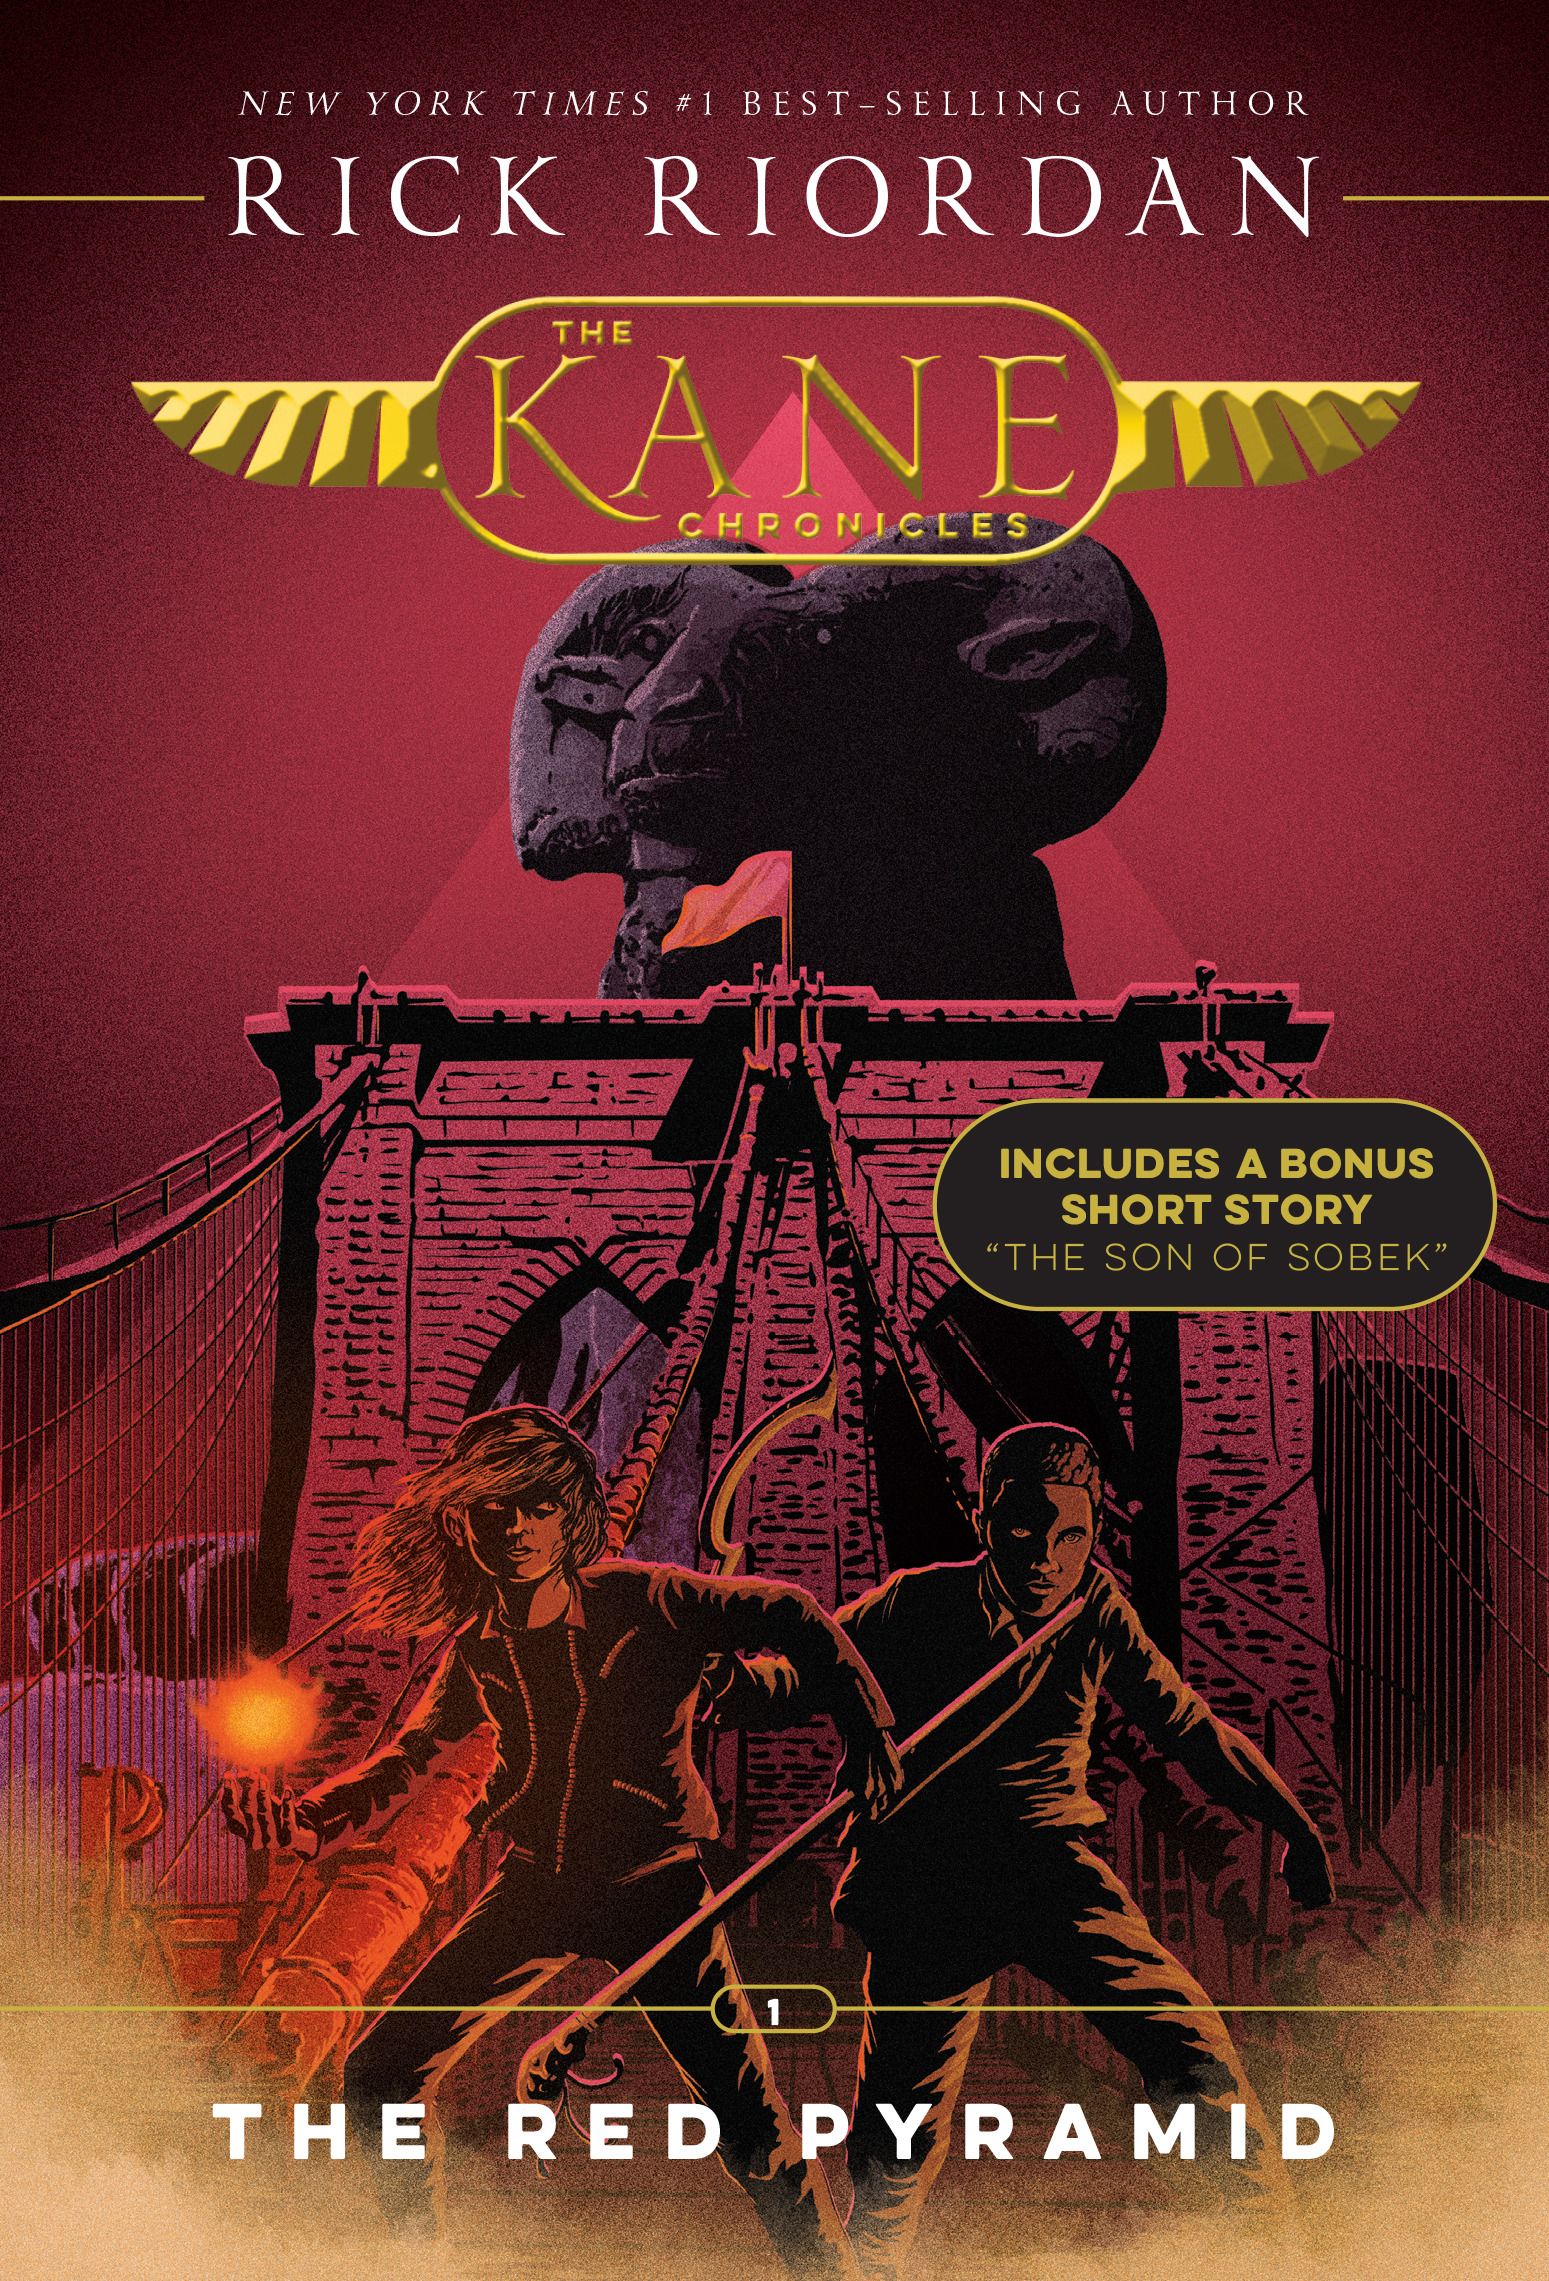 Kane Chronicles # 1: The Red Pyramid